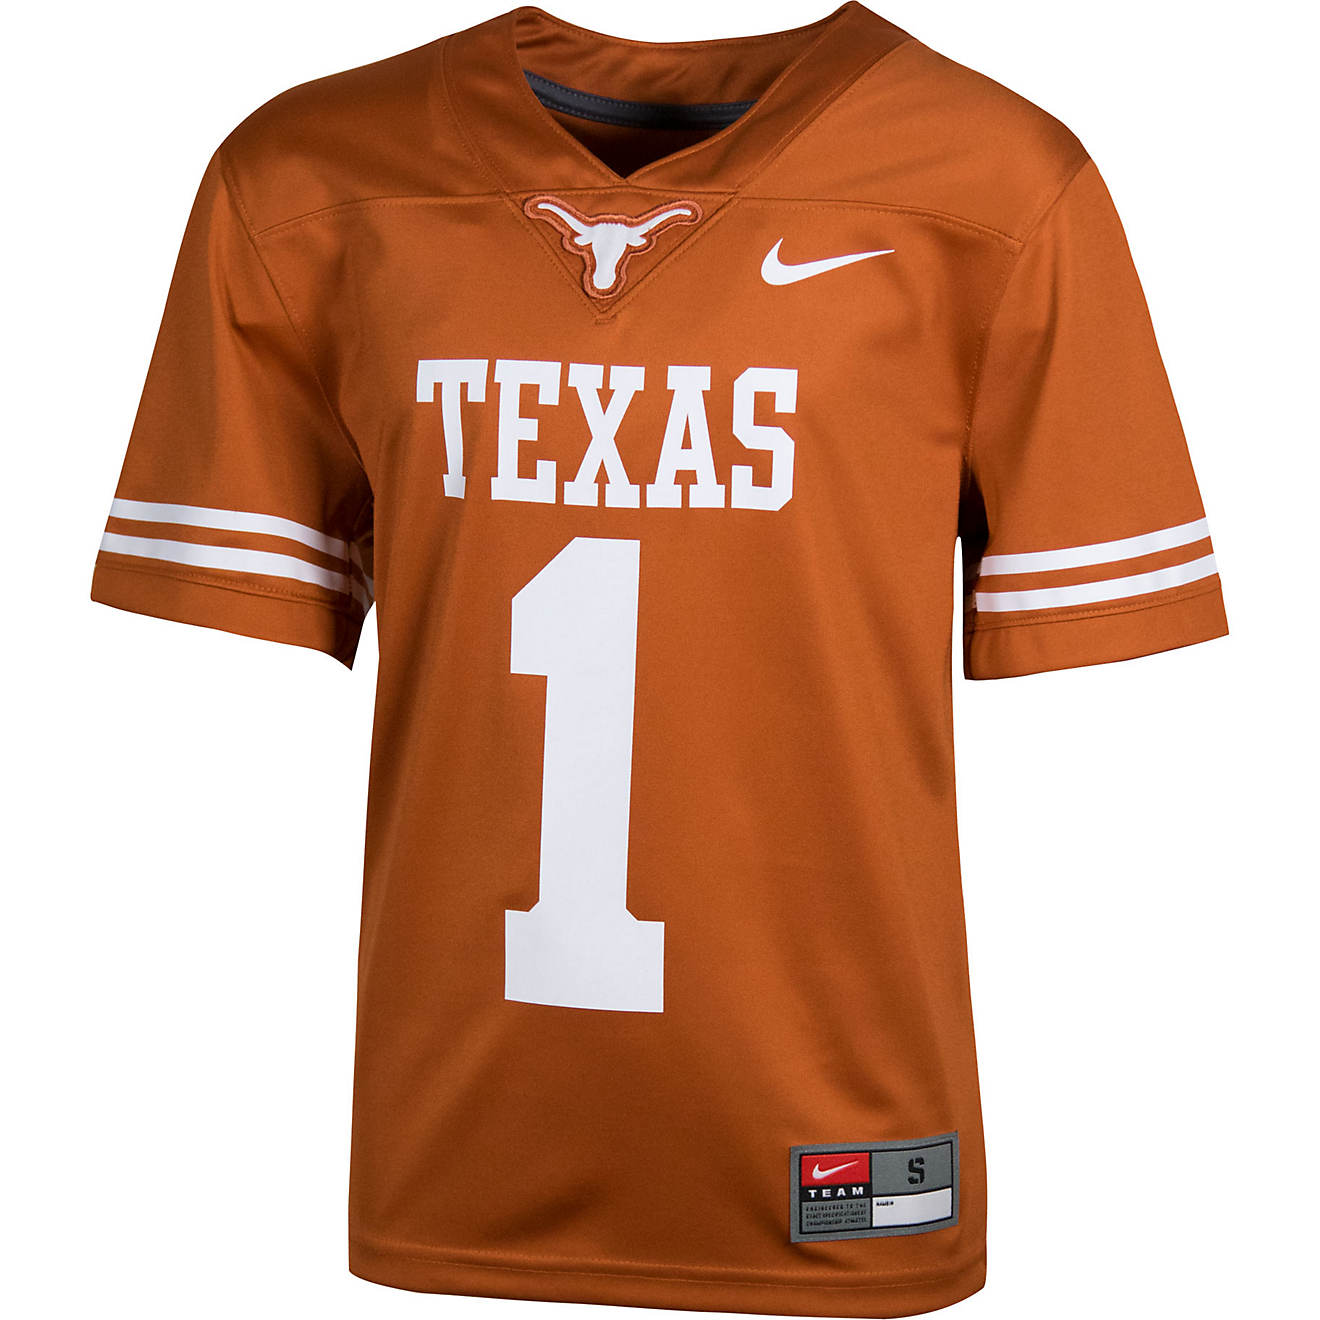 Nike Boys' University of Texas Young Athletes Replica Football Jersey                                                            - view number 1